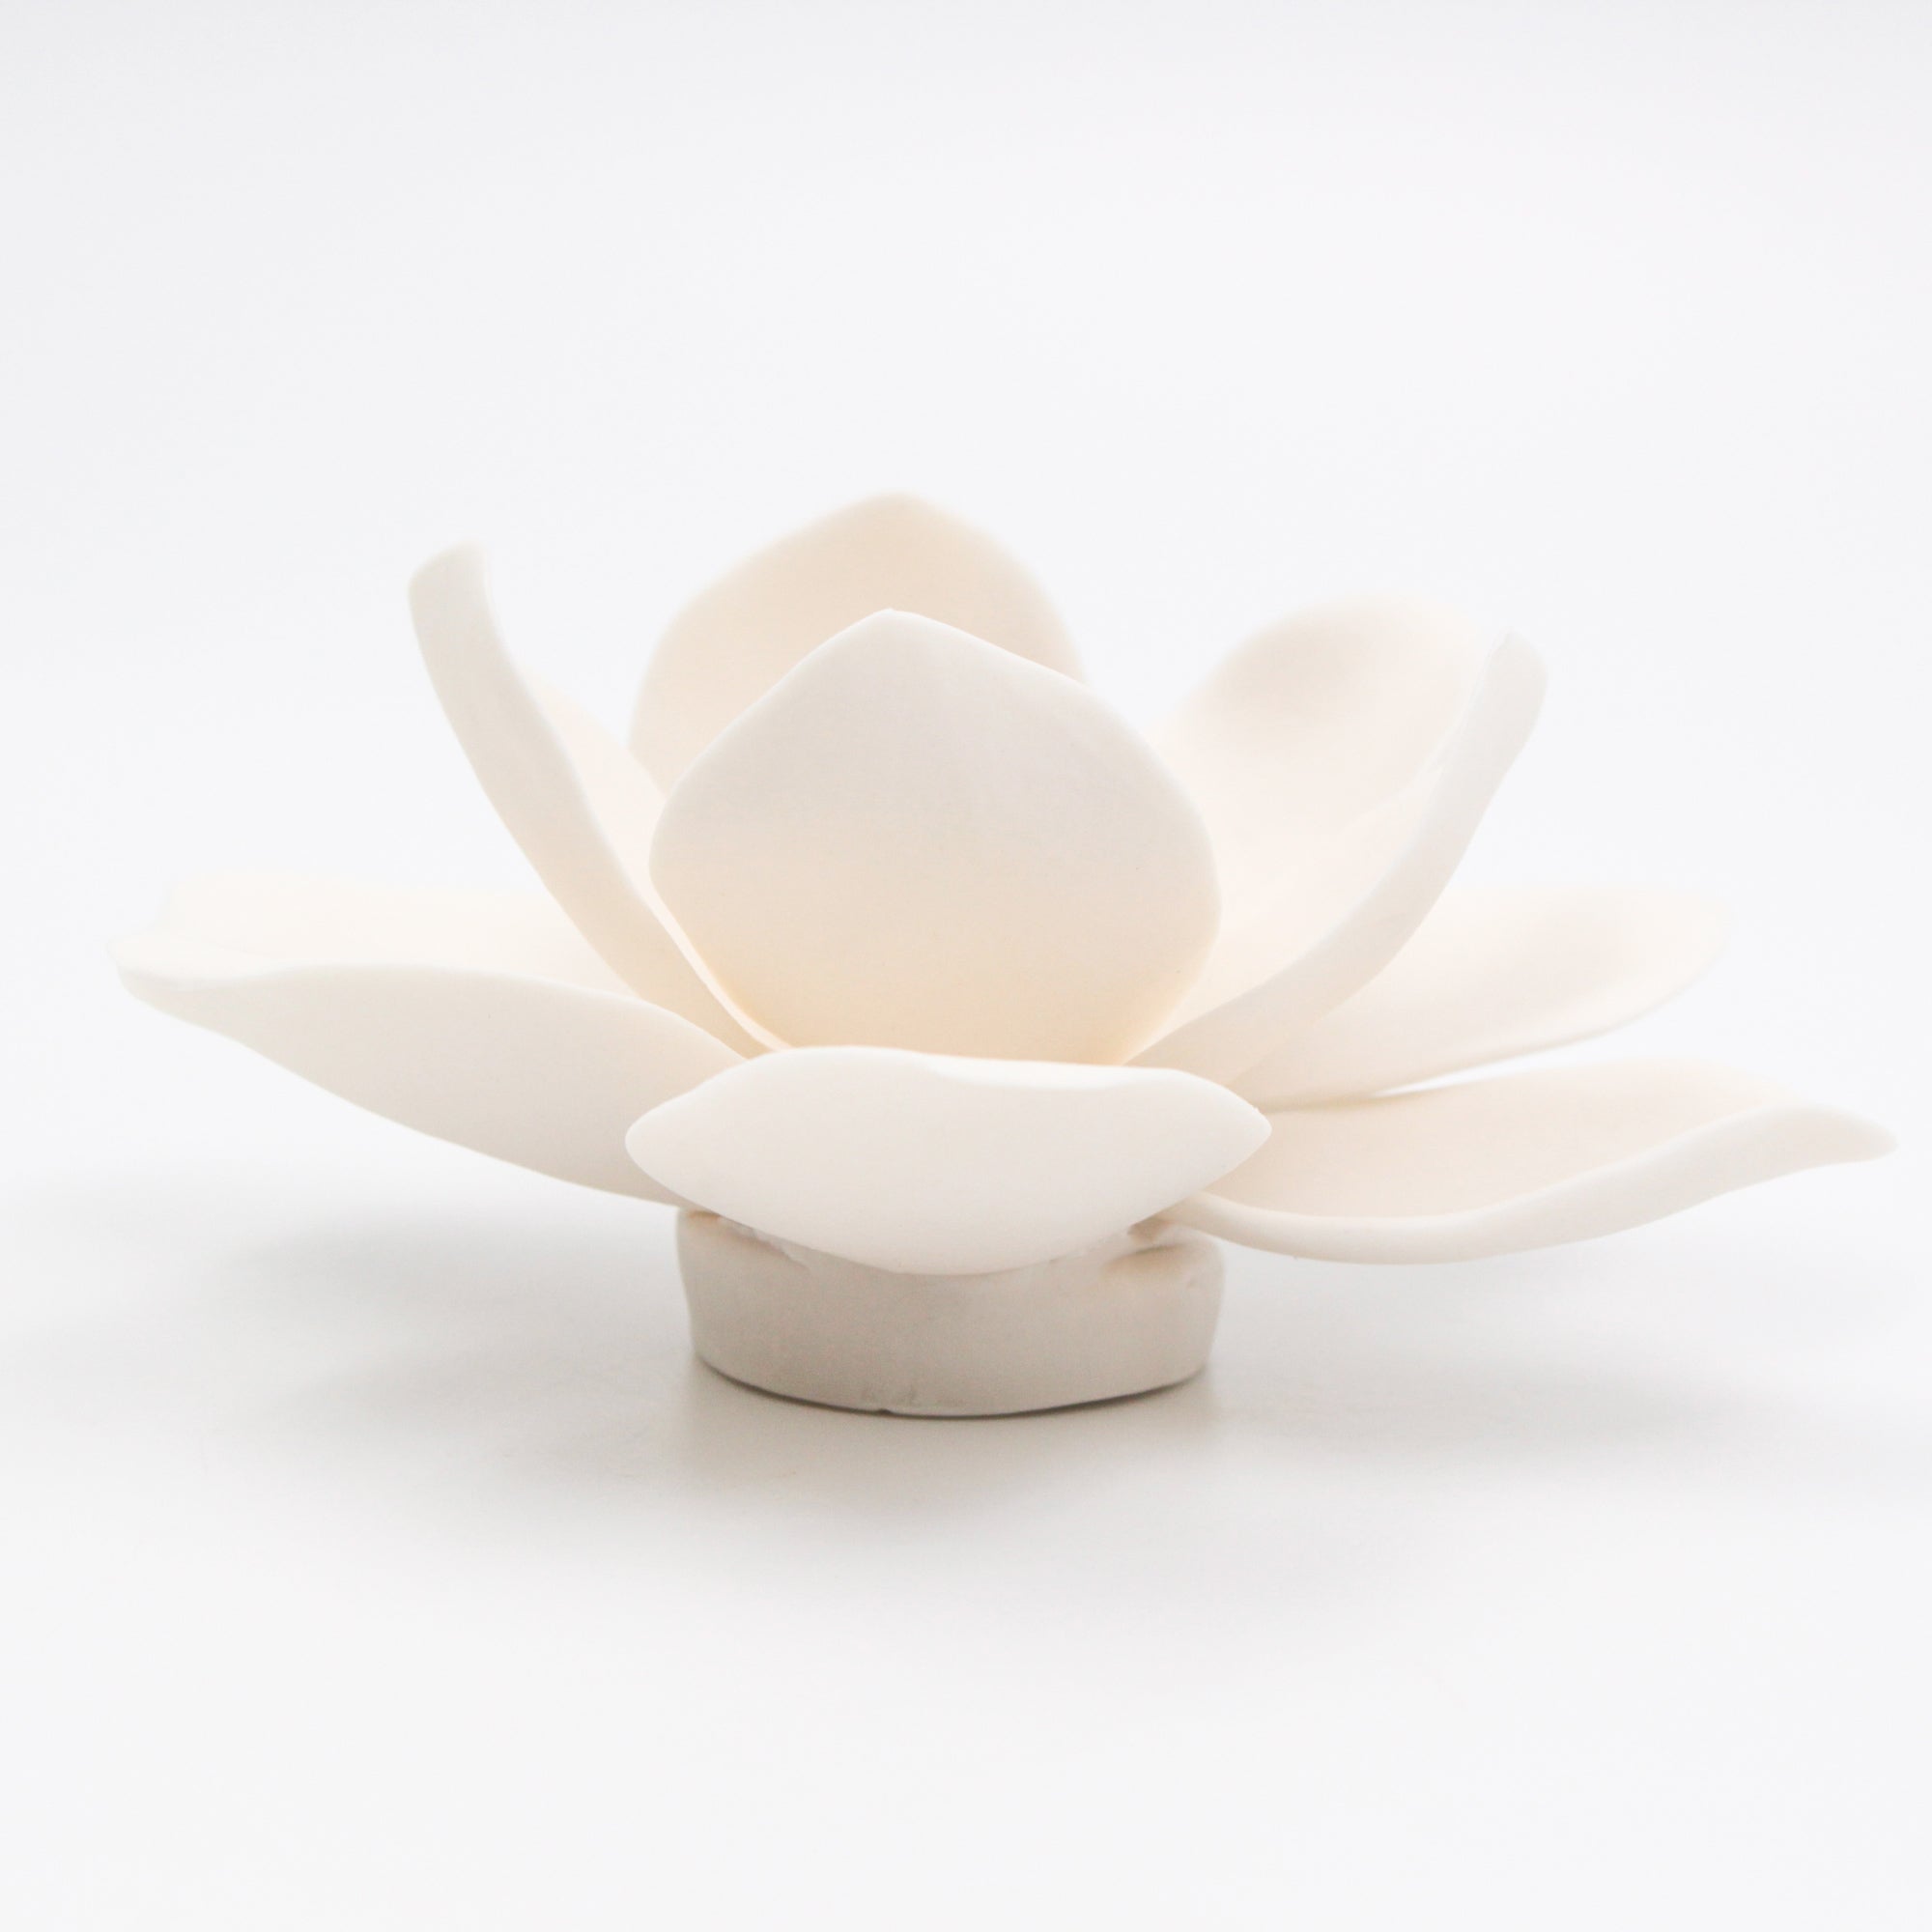 Golden Porcelain Magnolia- Handmade Porcelain Flower for Interior and Event Decoration - Made in France by Alain Granell – Home and Wall Decoration